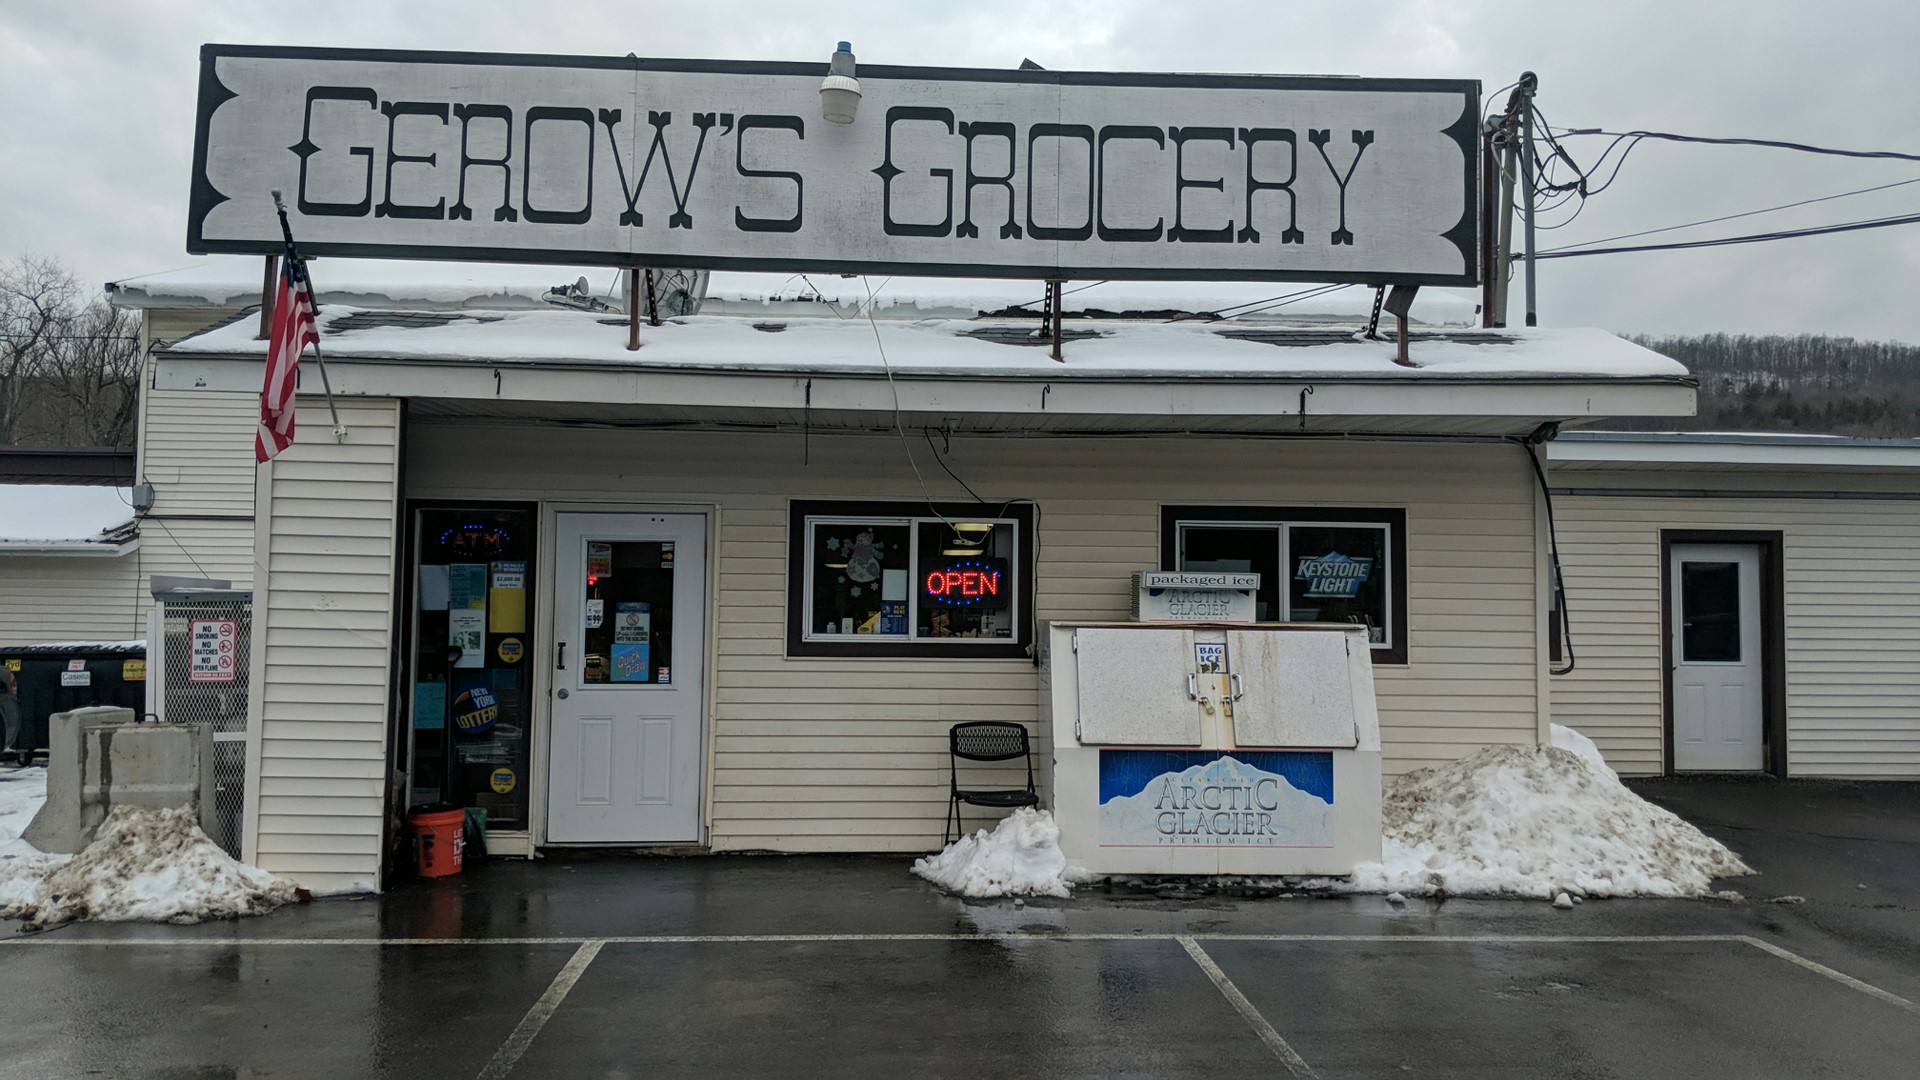 Gerow's Grocery